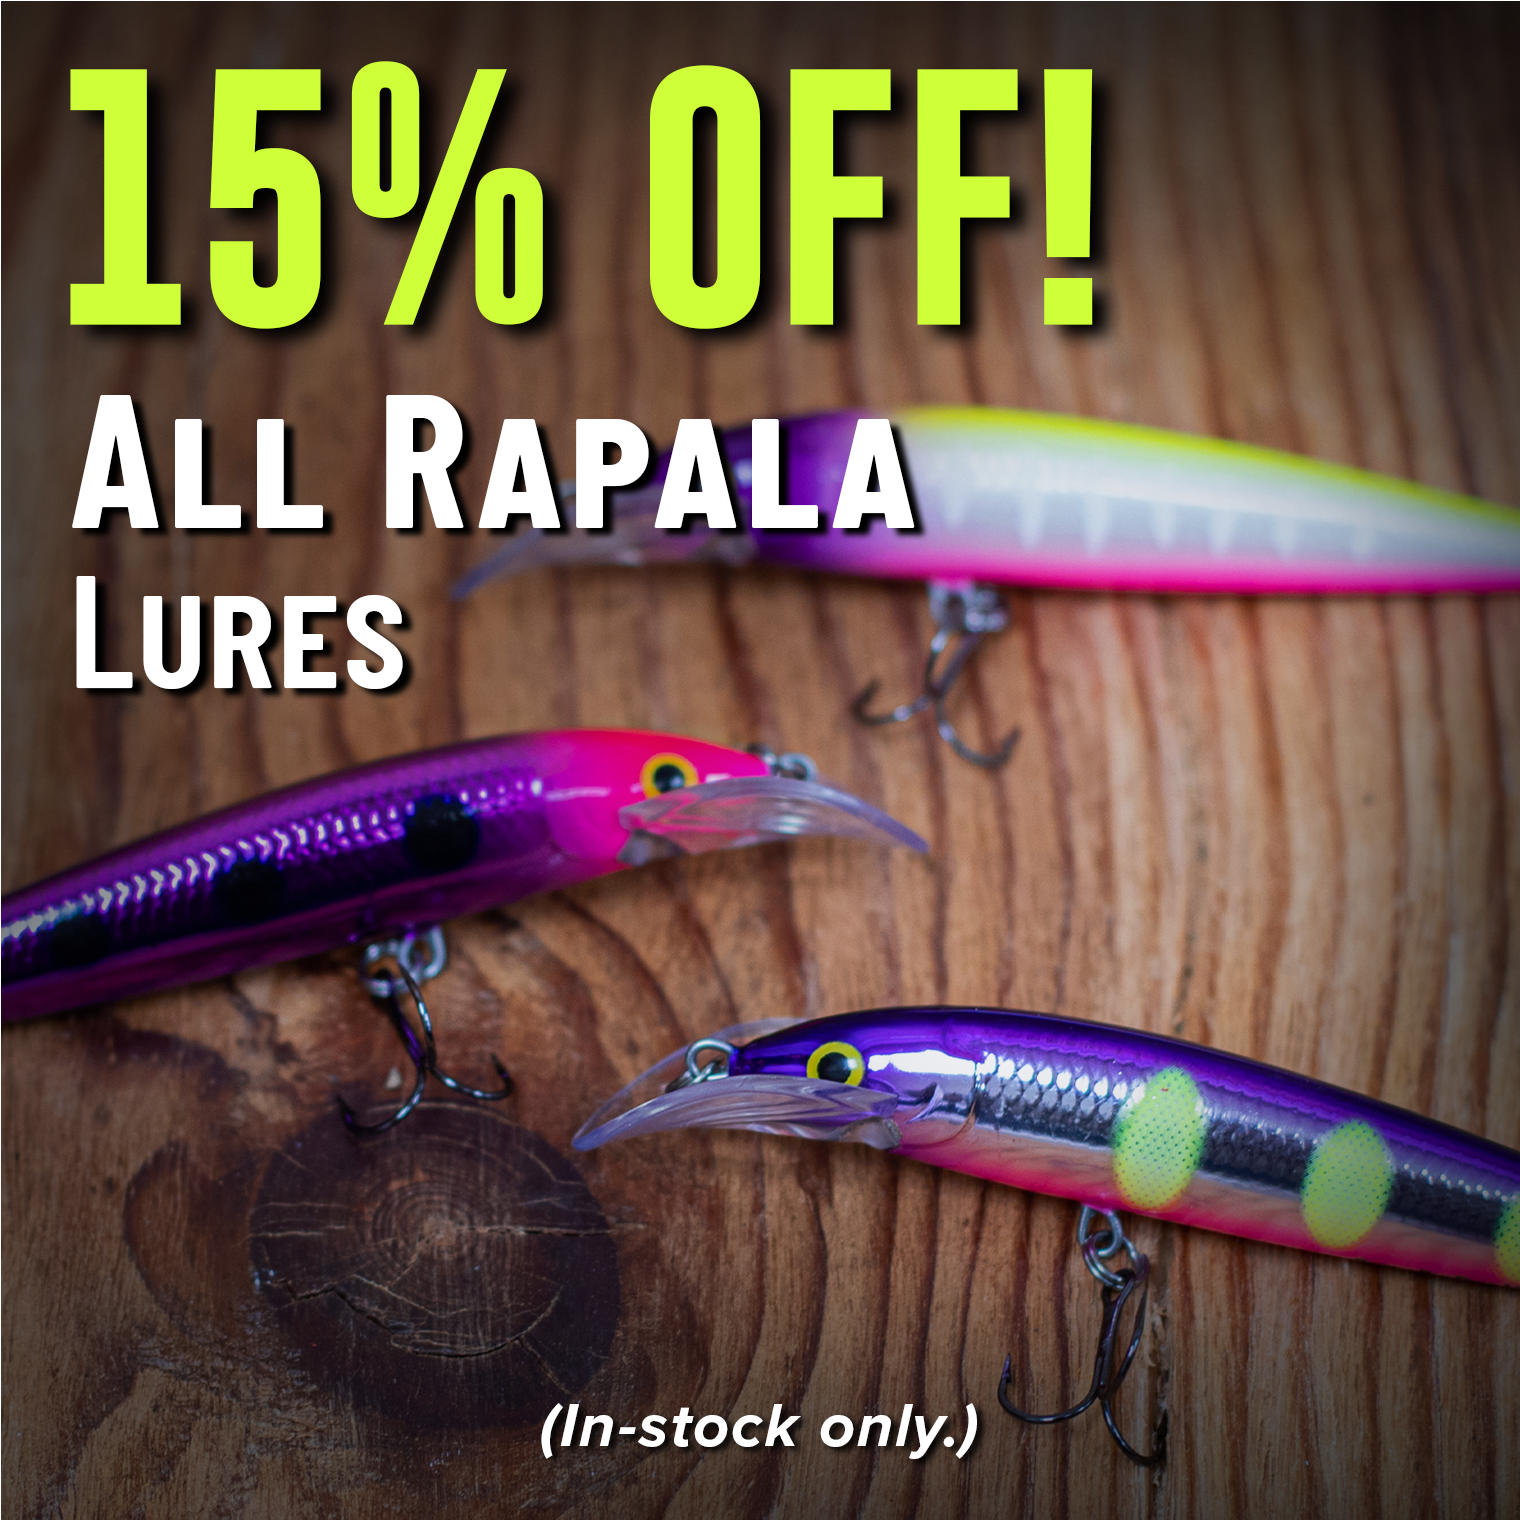 15% Off! All Rapala Lures (In-stock only.)